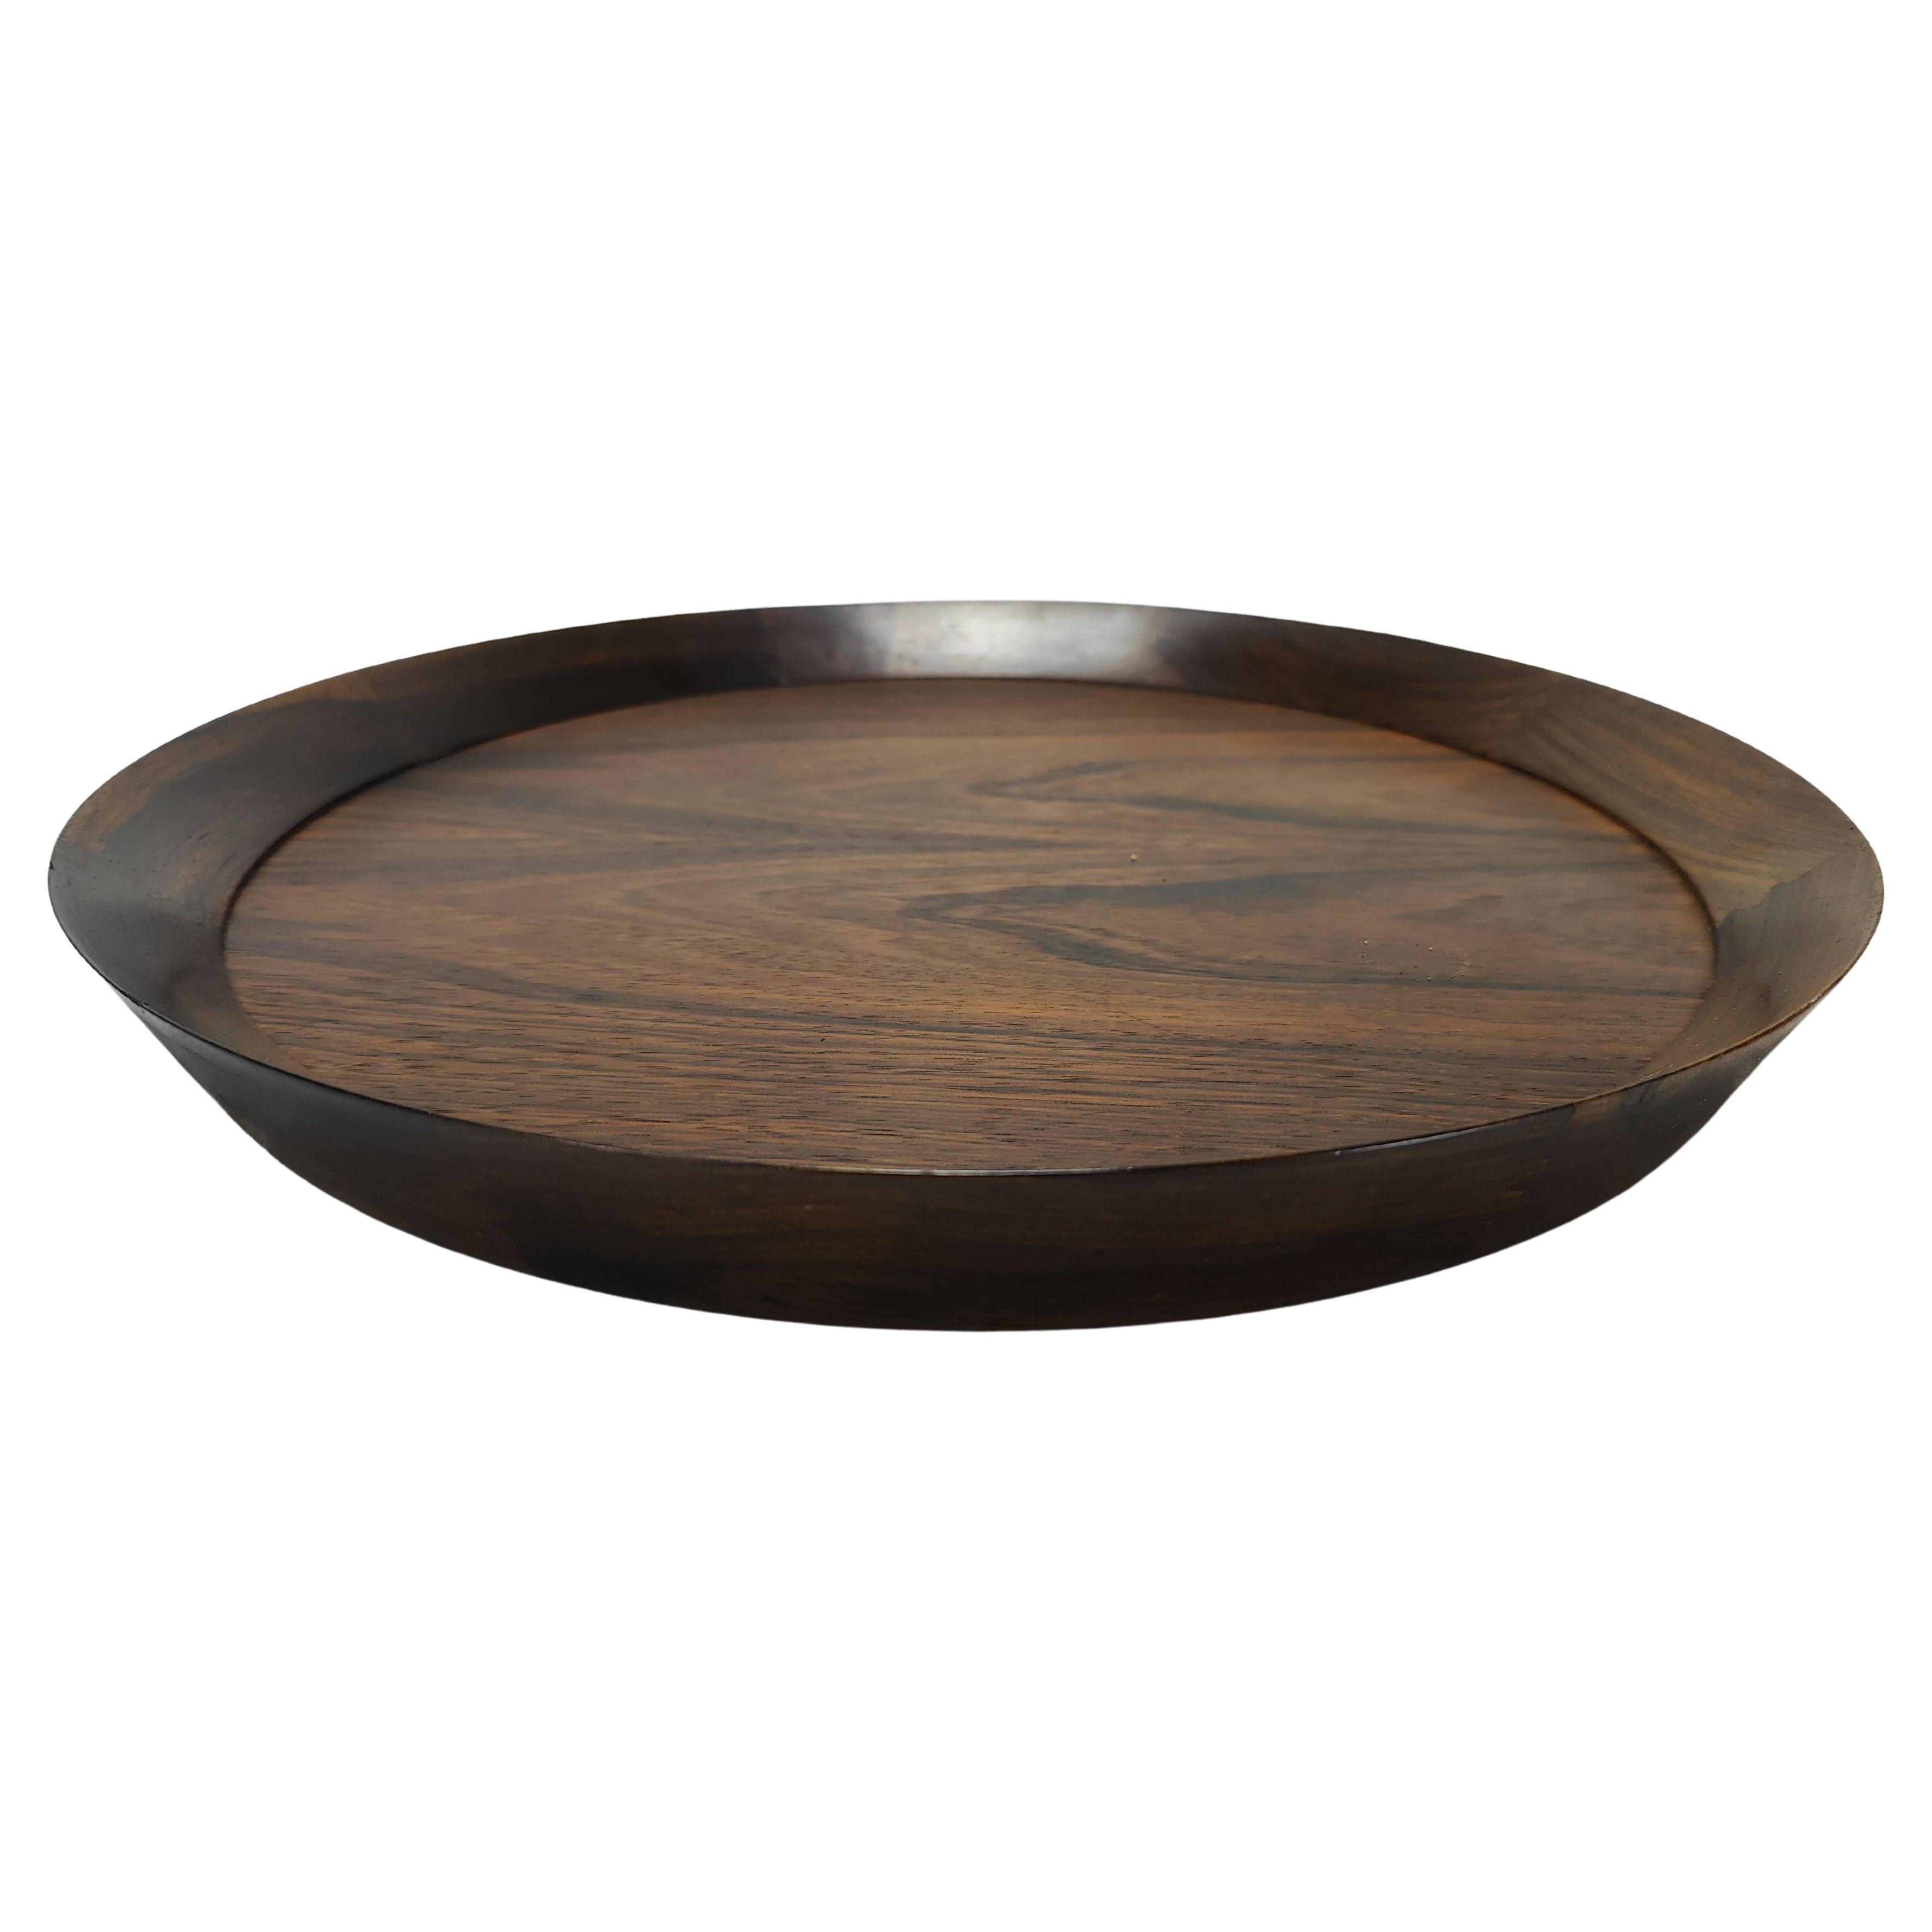 Vintage Mid-Century Modern Rosewood Serving Tray